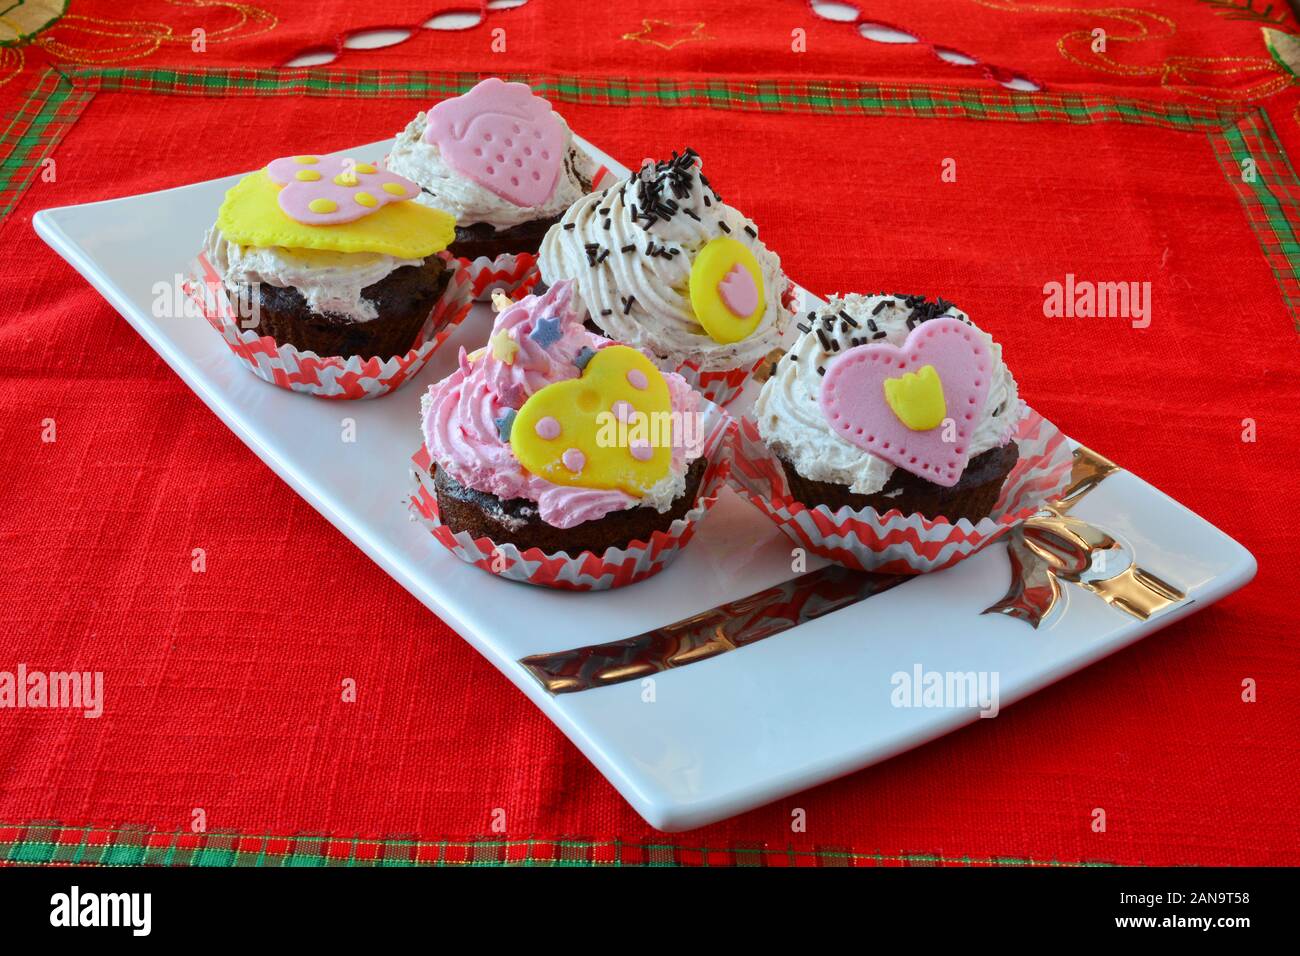 Love muffins, colorful velvet cupcakes decorated with marzipan hearts served in white ceramic saucer on table covered with red table cloth, side view Stock Photo